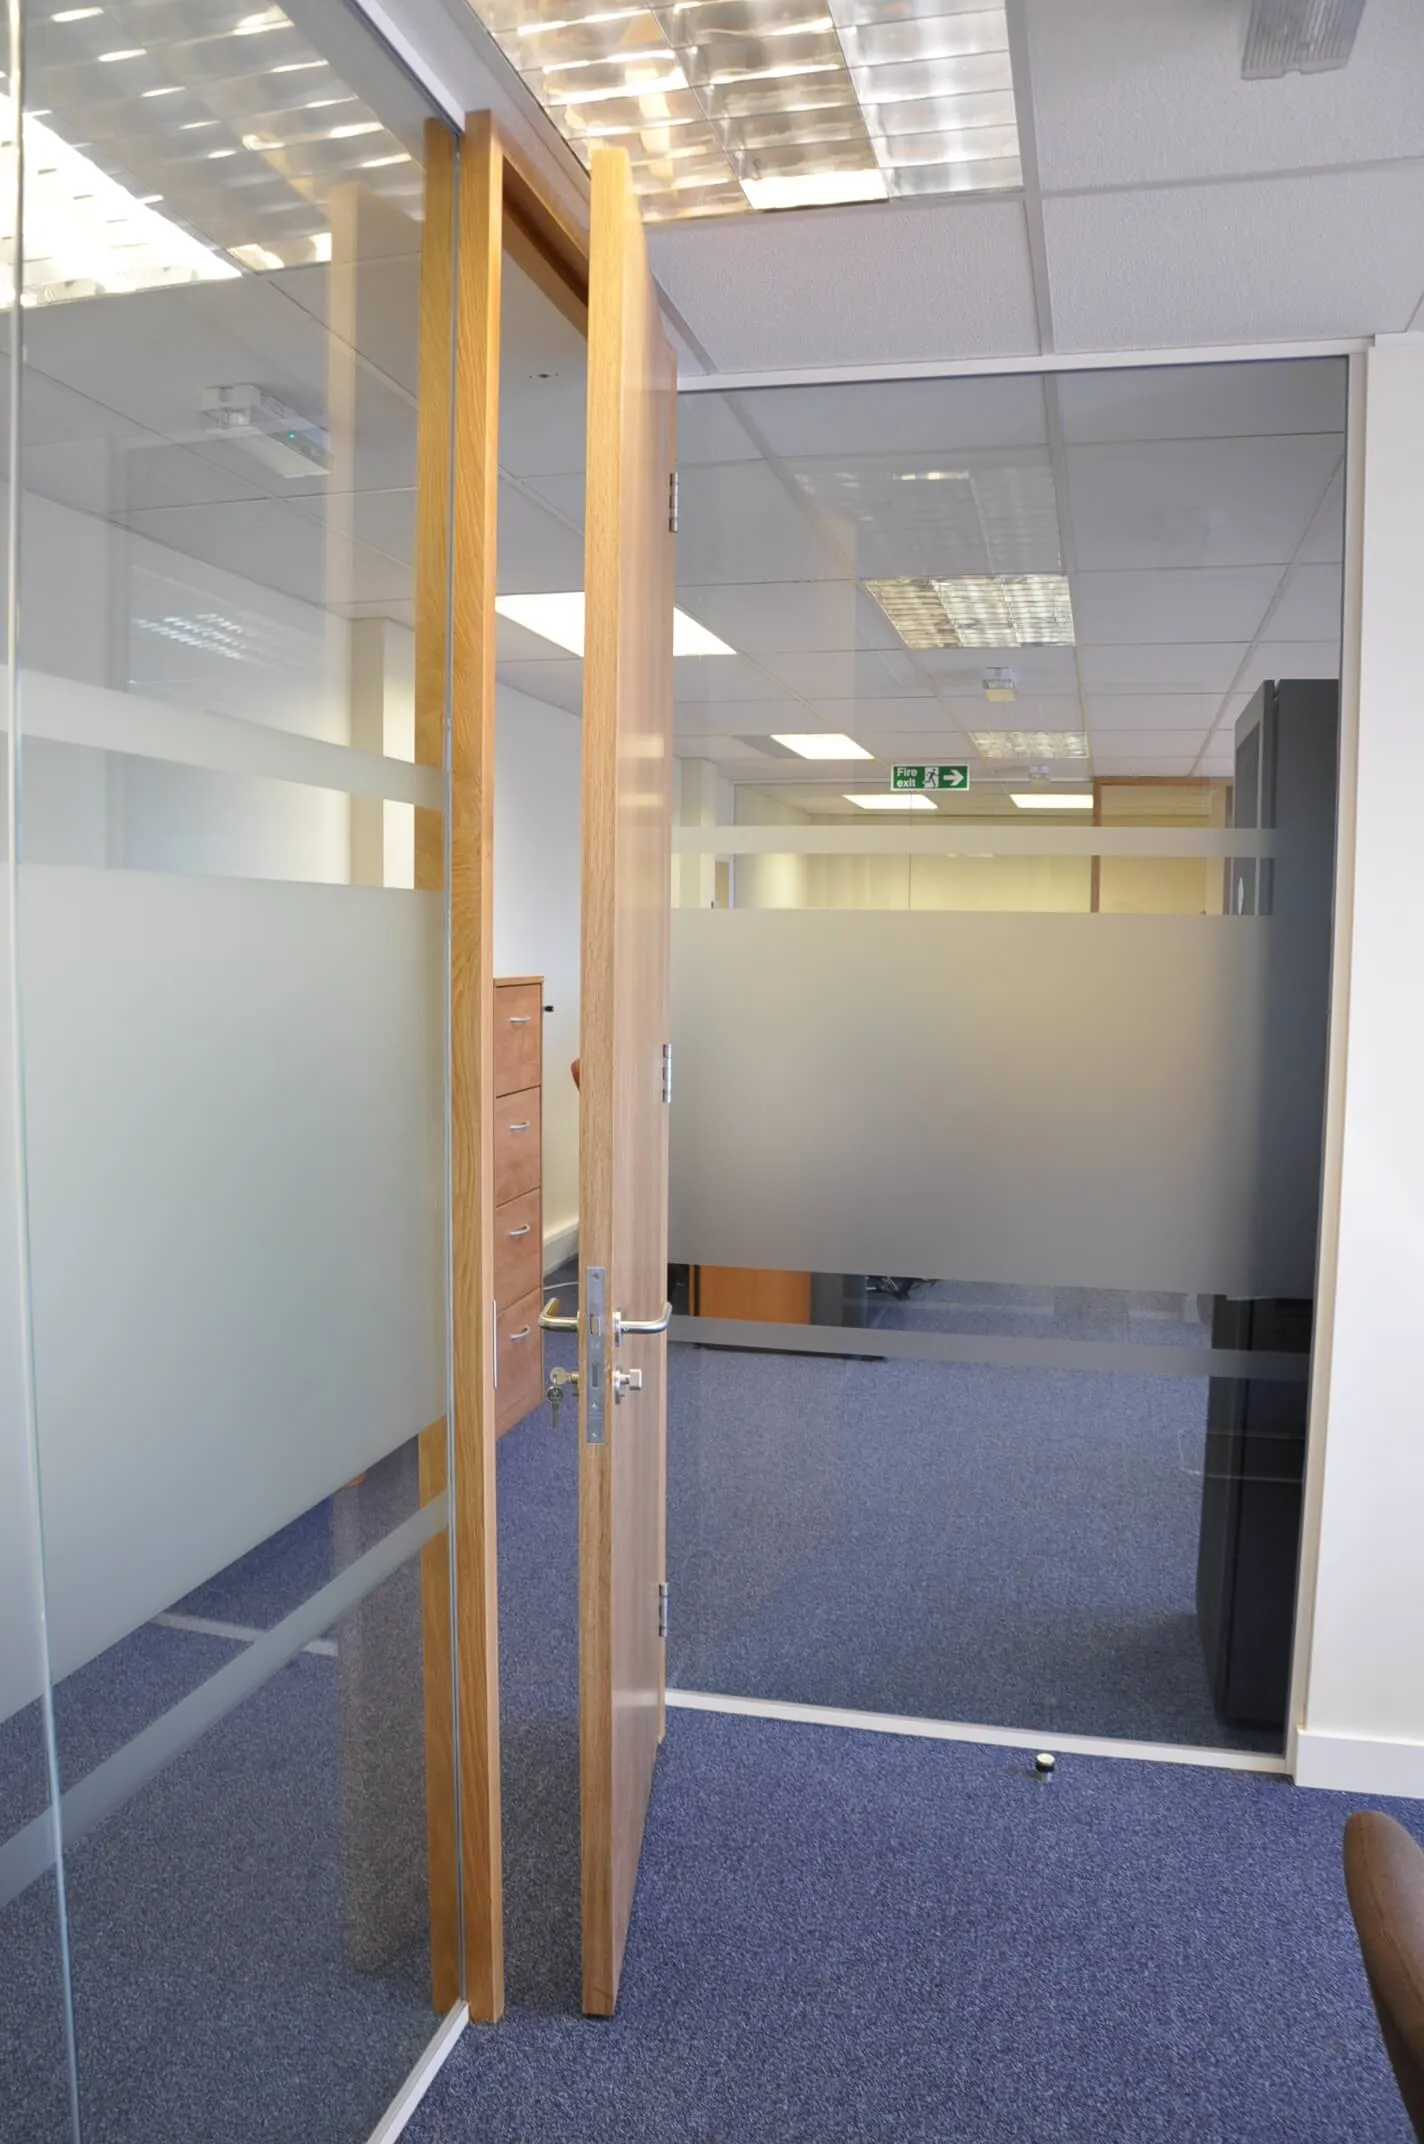 Designer floor in office with solid wood door along with glass partition